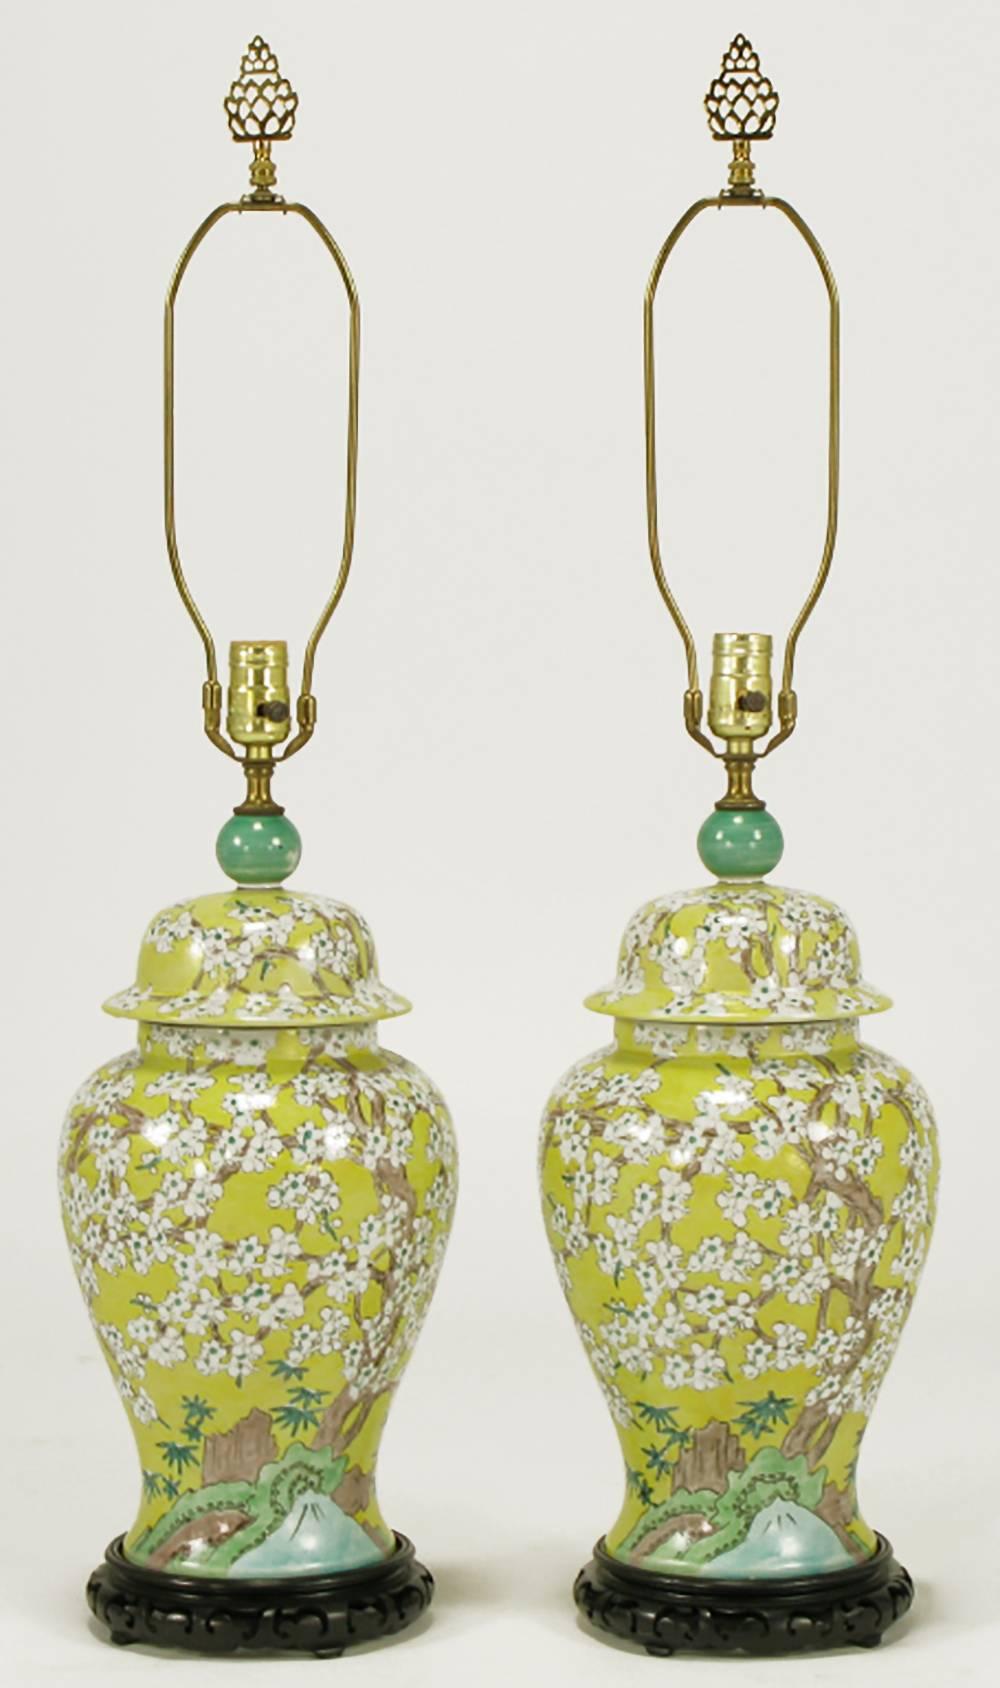 Pair of Chinese import hand-painted yellow glazed ceramic ginger jars with green finial table lamps on carved and ebonized wood bases. Hand-painted white cherry blossoms on branches with a stream, castle and foliate detail. Brass stem, harp, socket